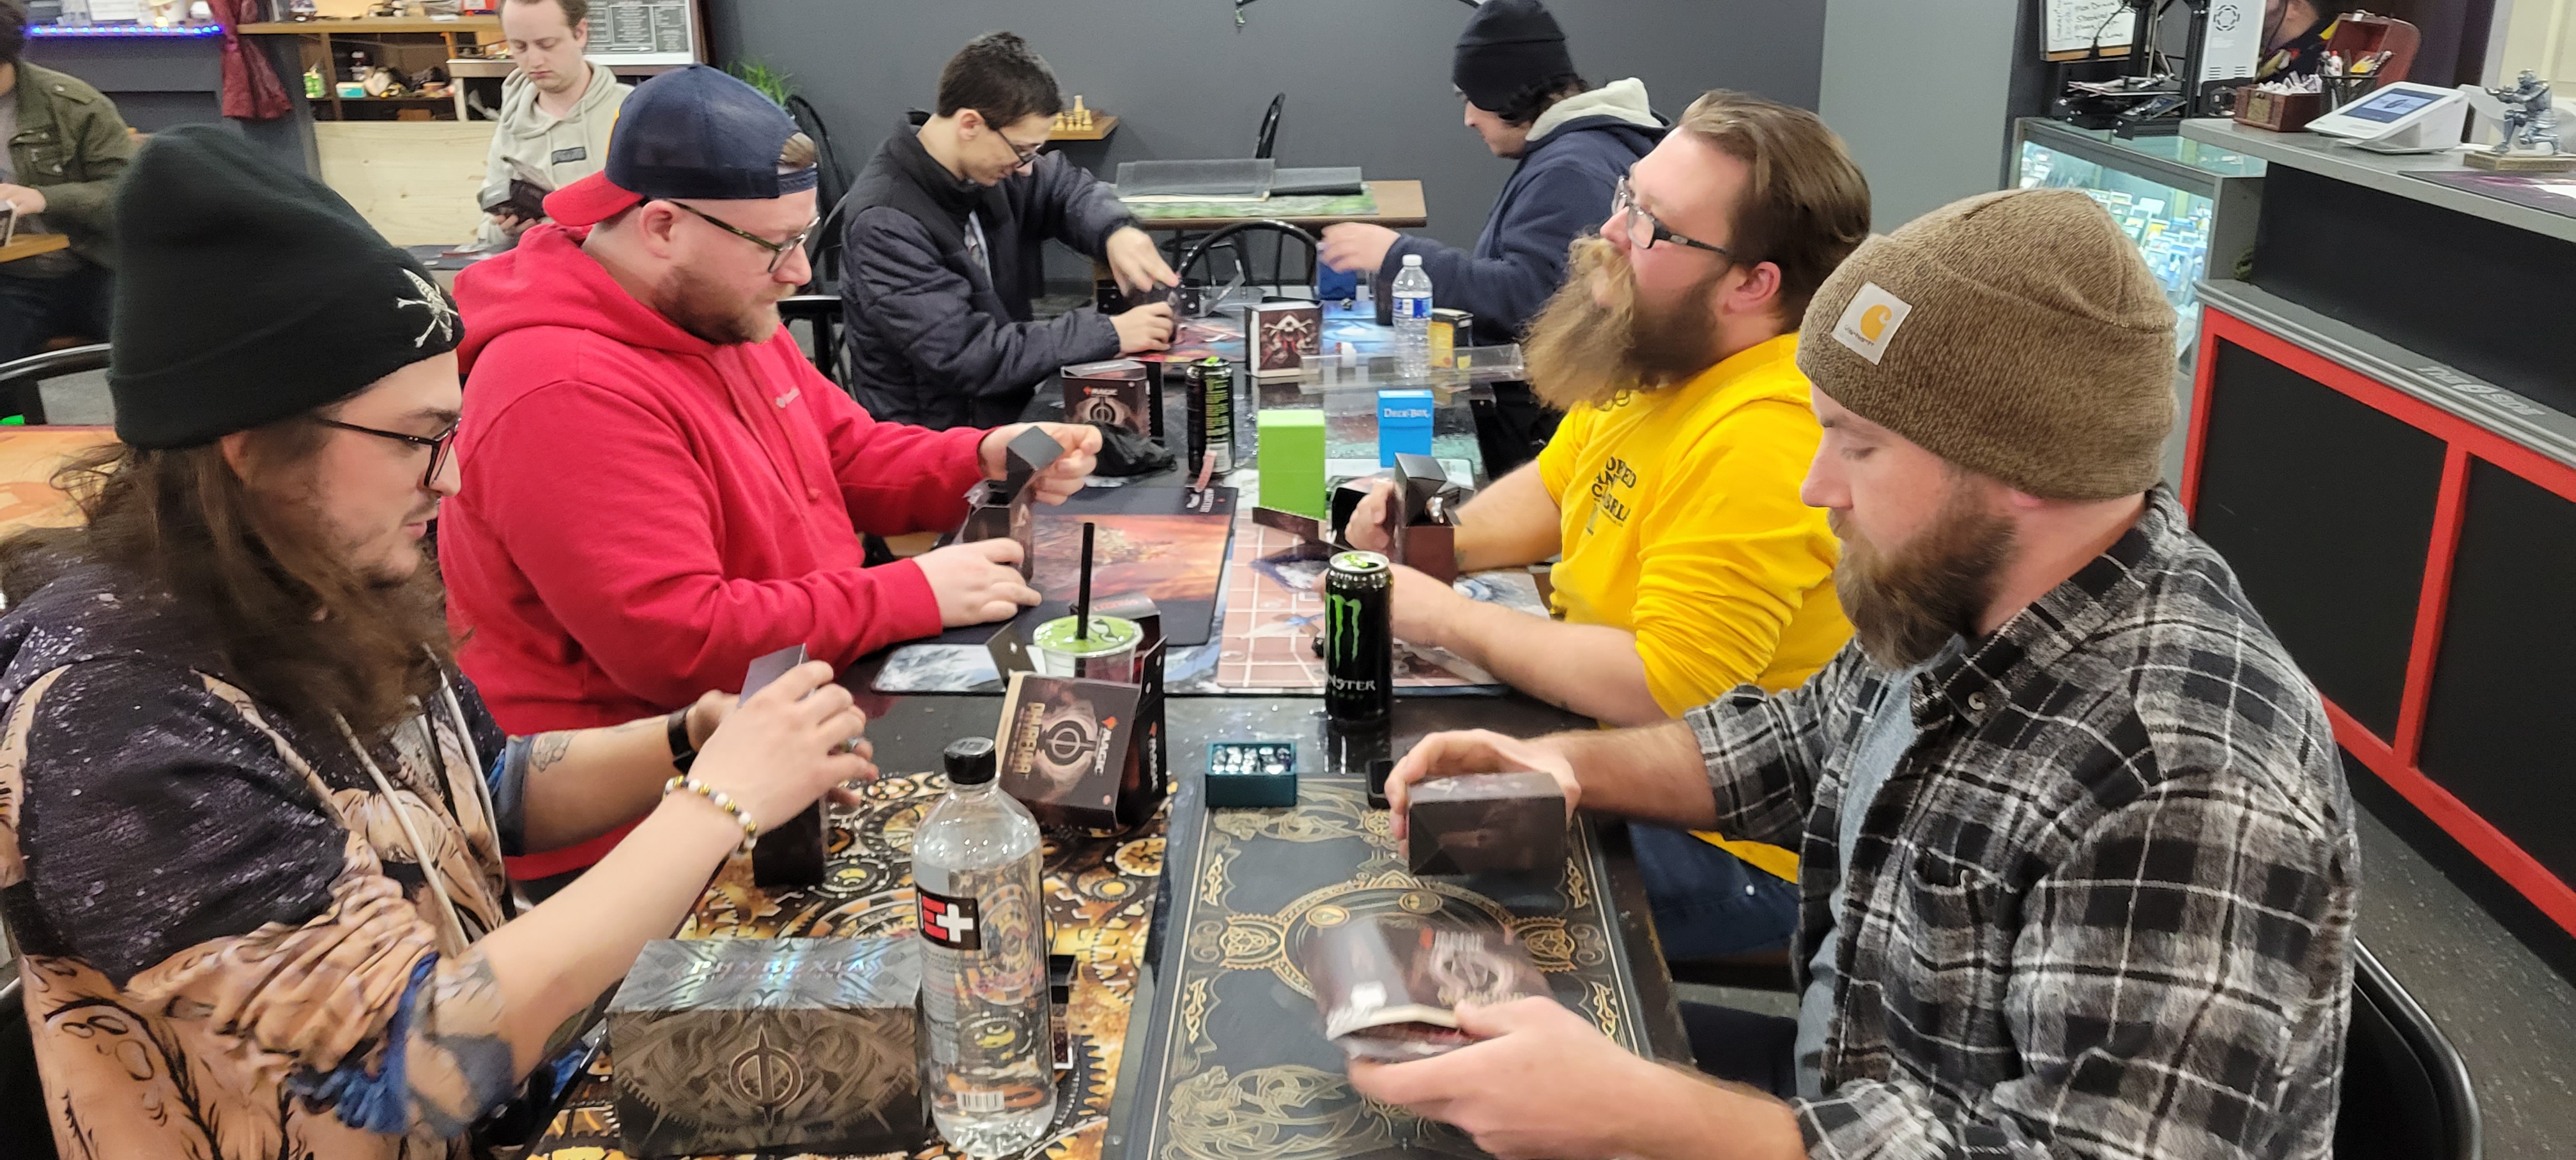 Tabletop gamers at The 8th Side, Lincoln Park, Michigan. Photo by Katherine Warden